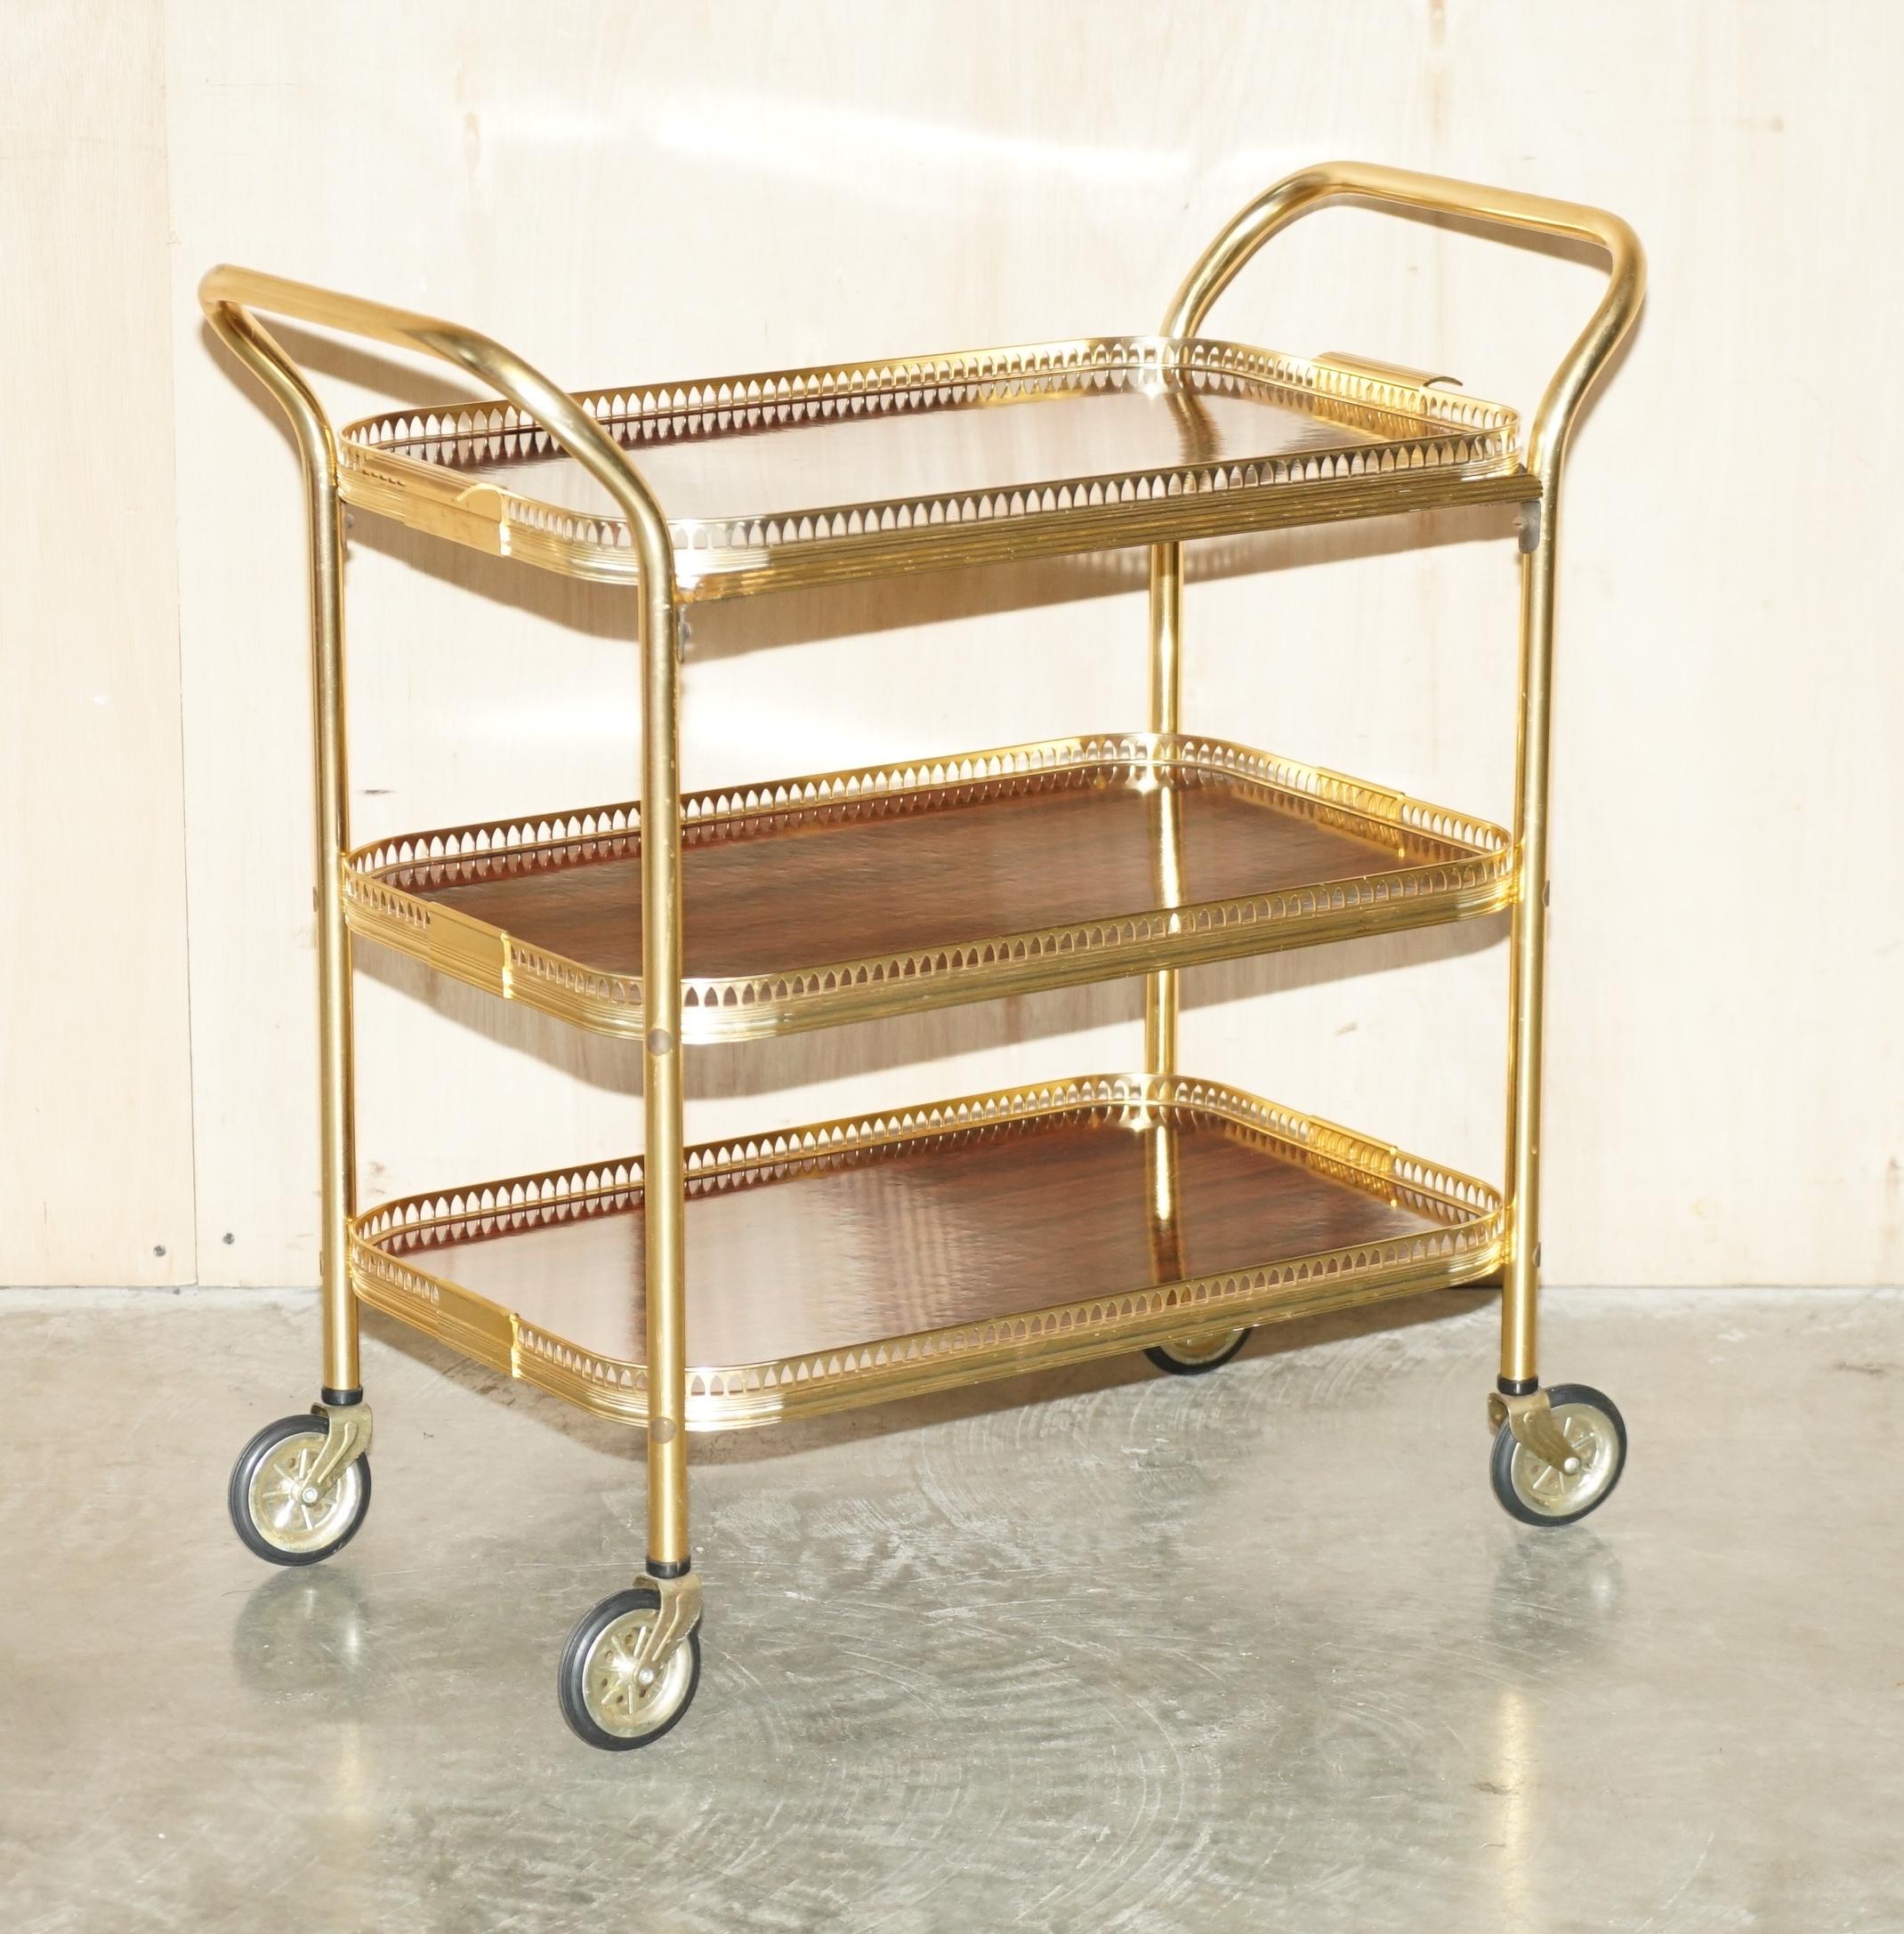 We are delighted to offer for sale this Mid Century Modern brass and Rosewood finish drinks trolley circa 1950's with removable tray top 

A good looking well made and decorative drinks serving trolley, the Rosewood finish is sublime, the top